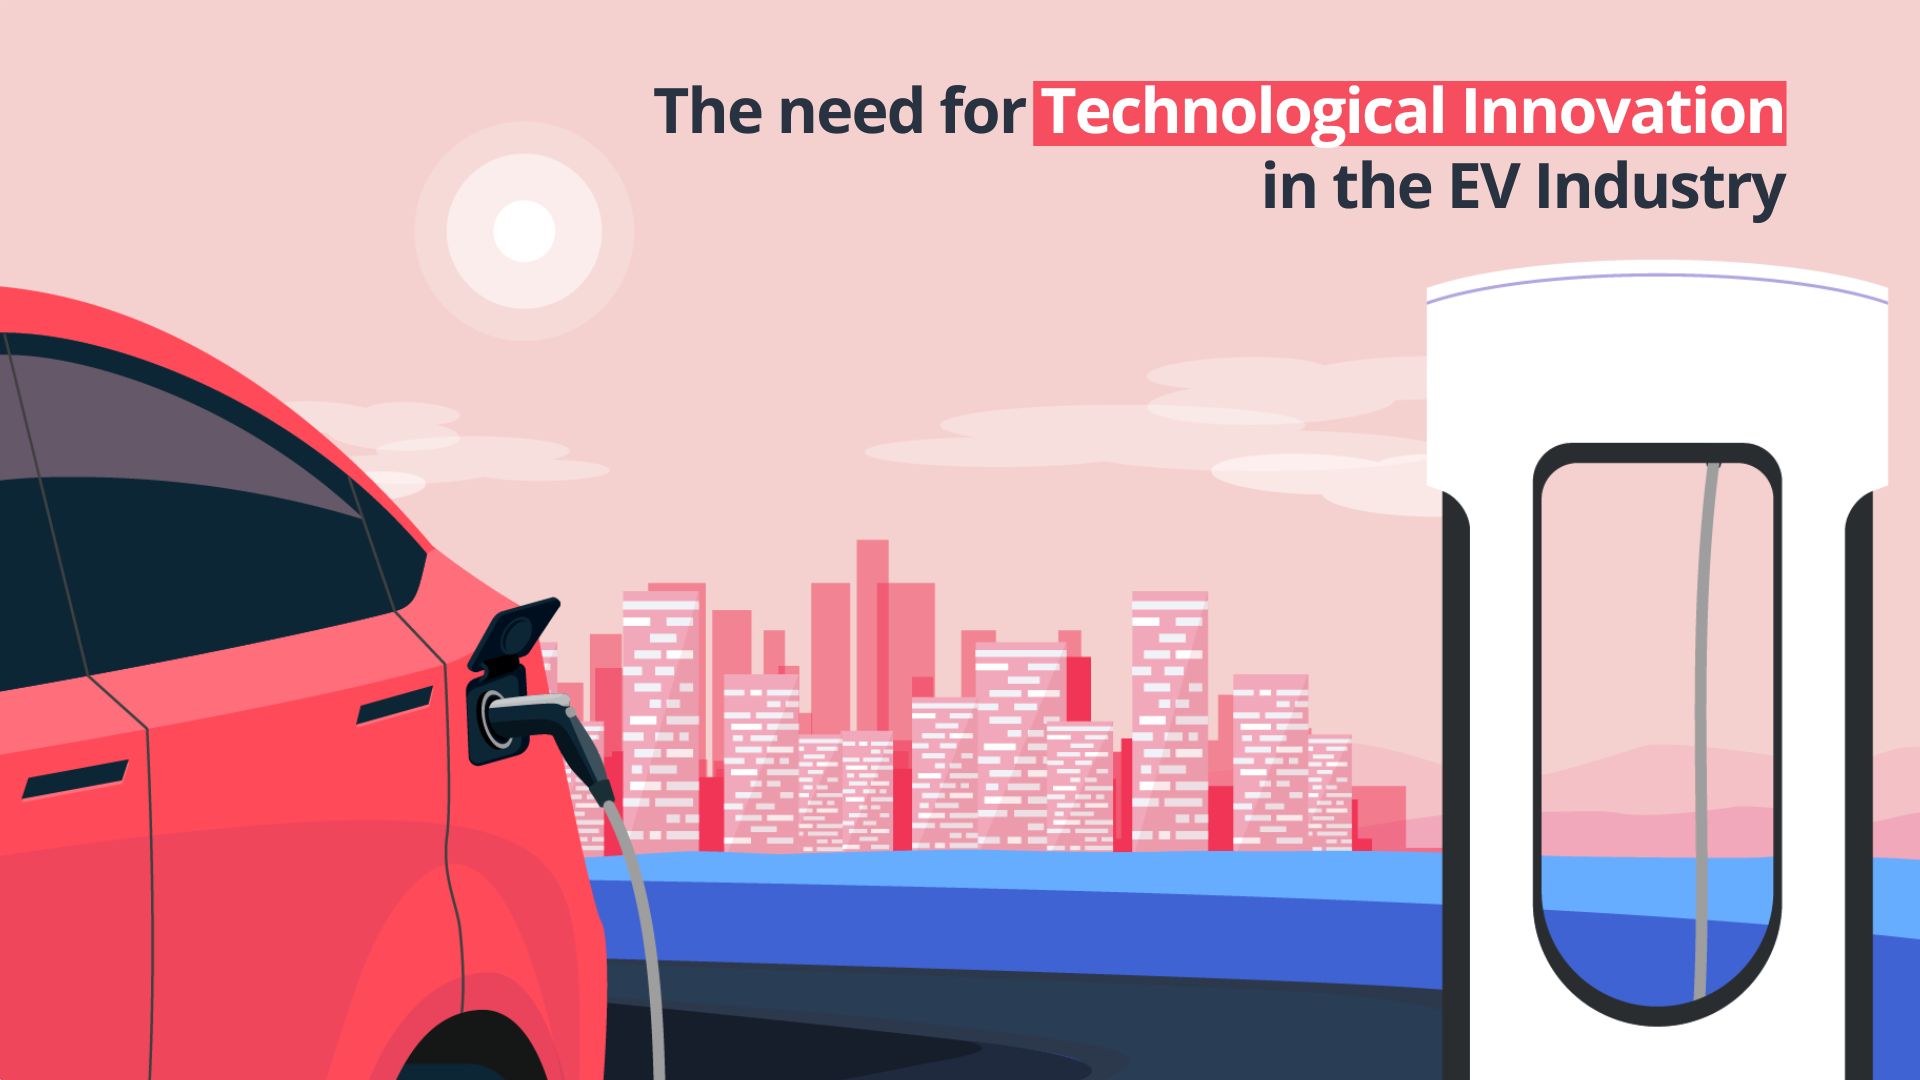 https://e-vehicleinfo.com/need-for-technological-innovation-in-the-ev-industry/